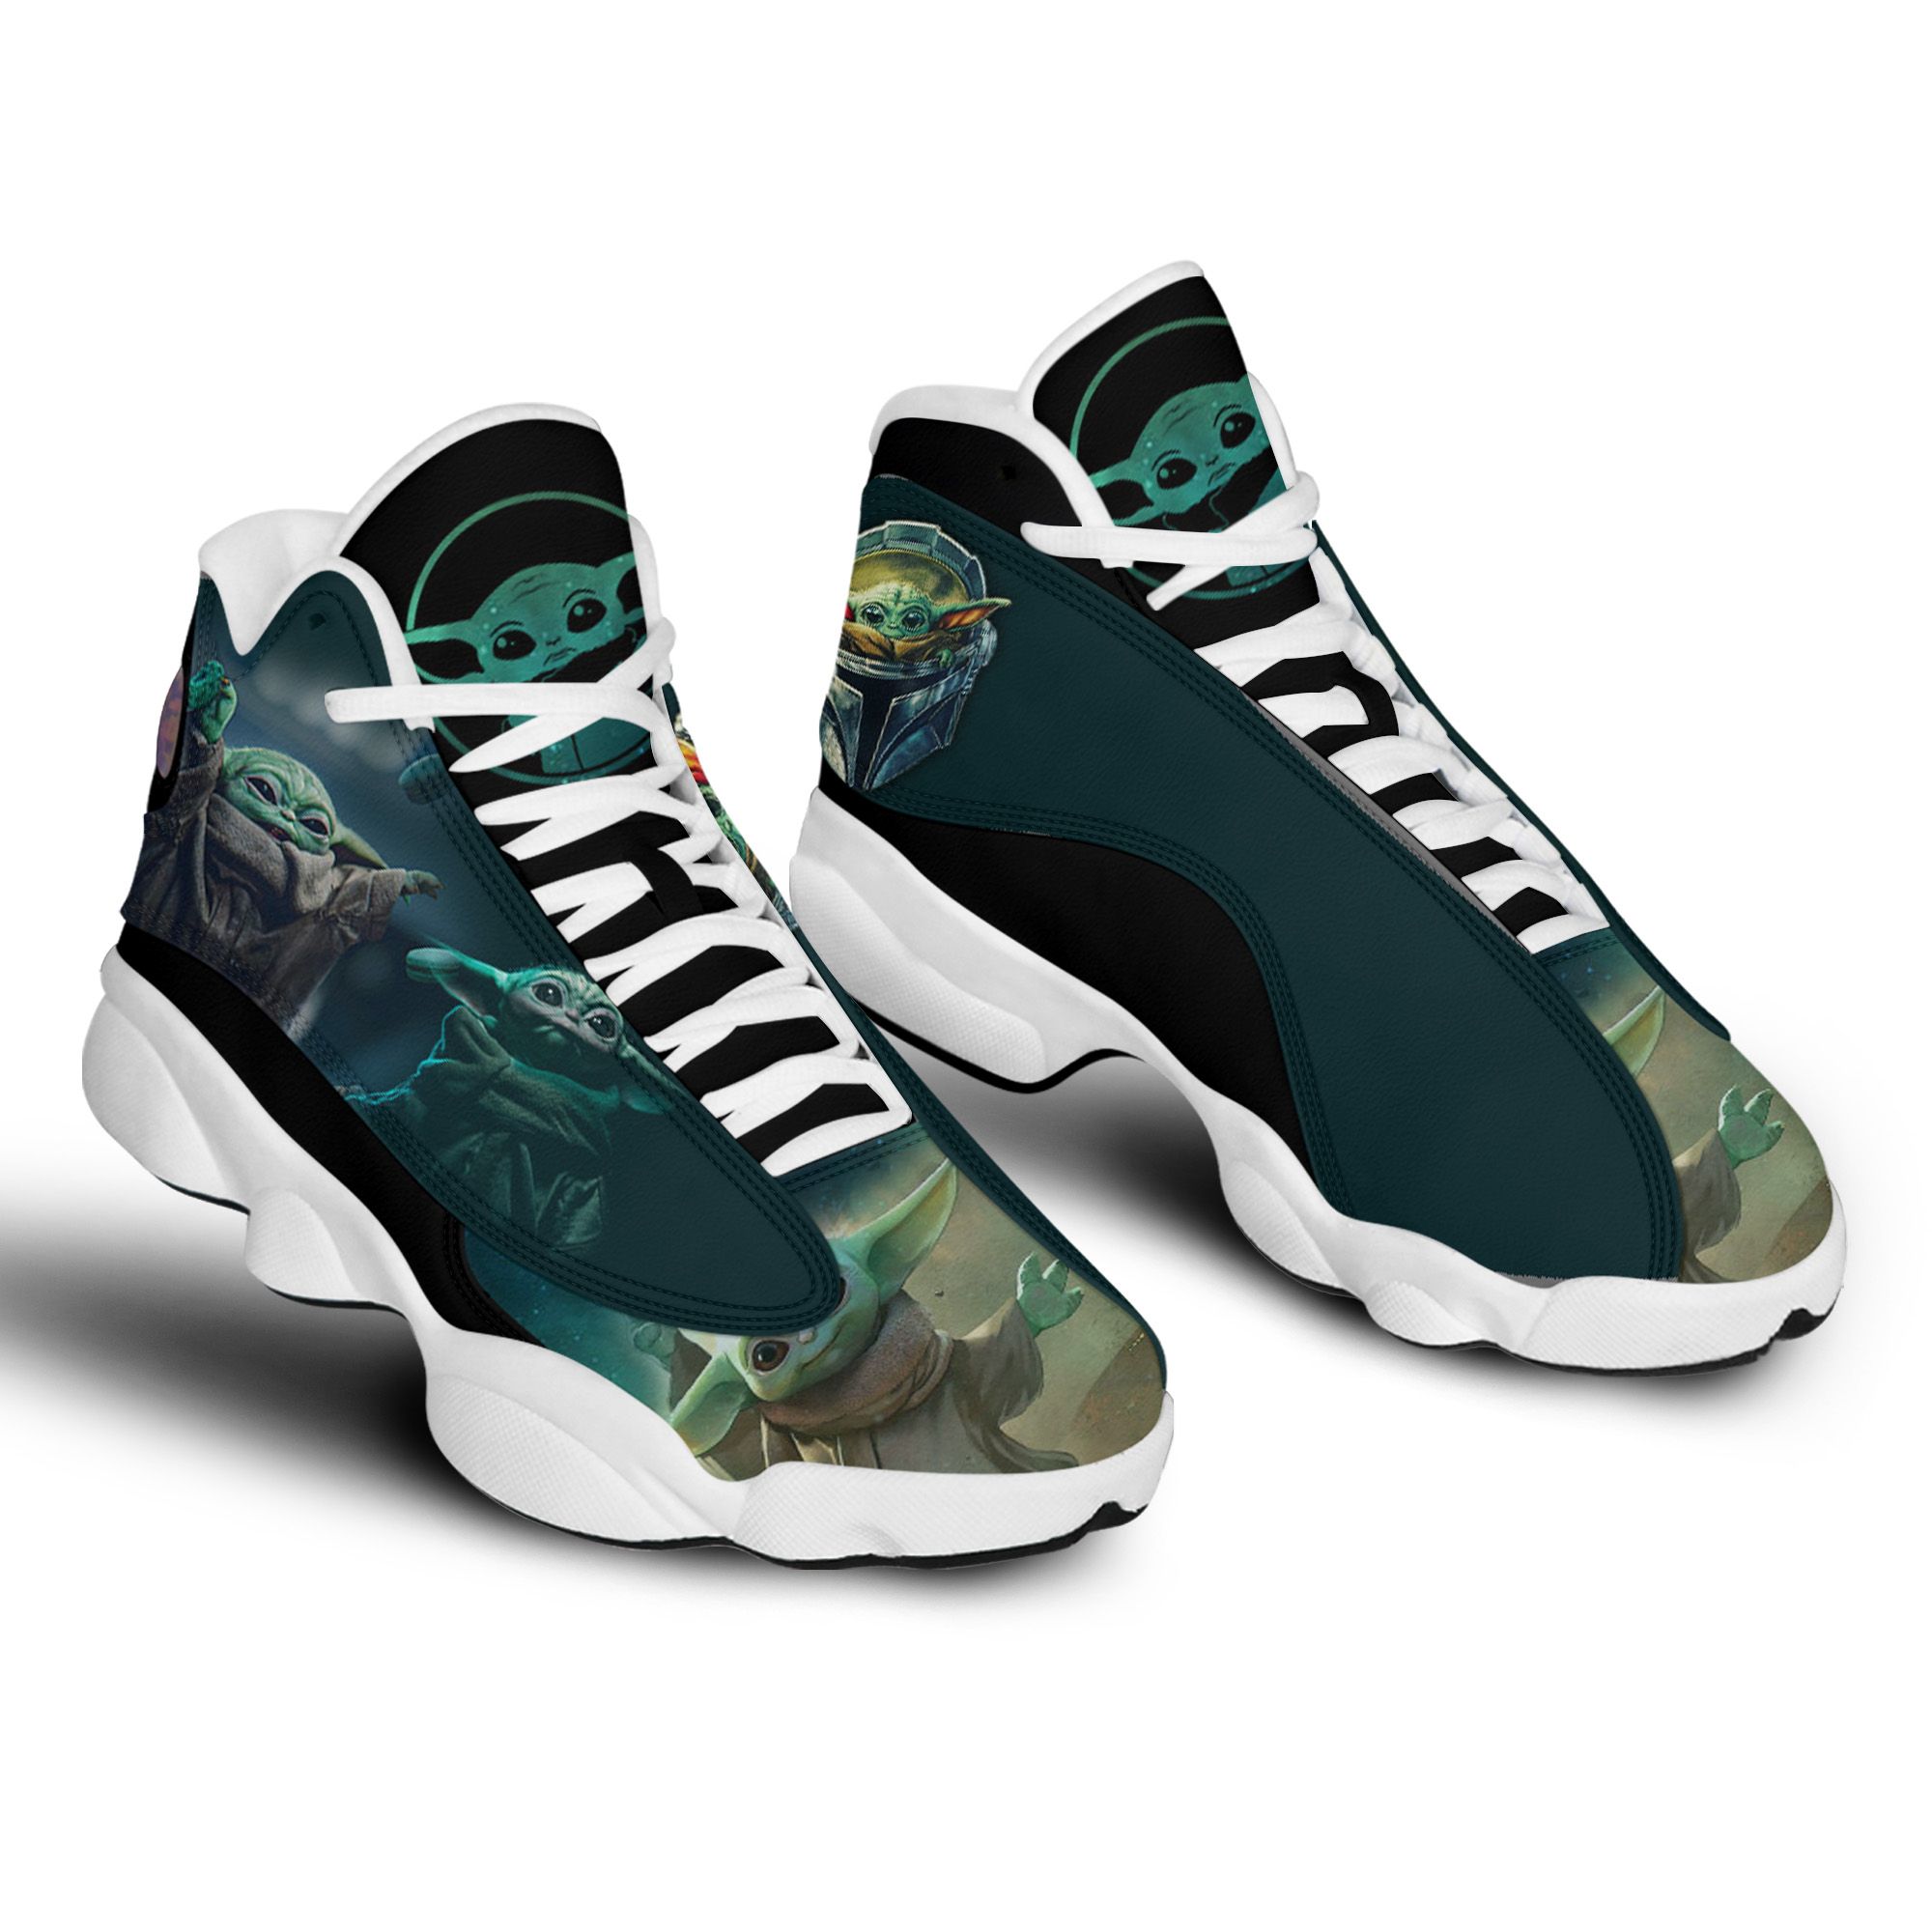 Baby yoda from star wars form air jordan 13 sneakers l702-hao1 shoes all size for men- women - women / us 5